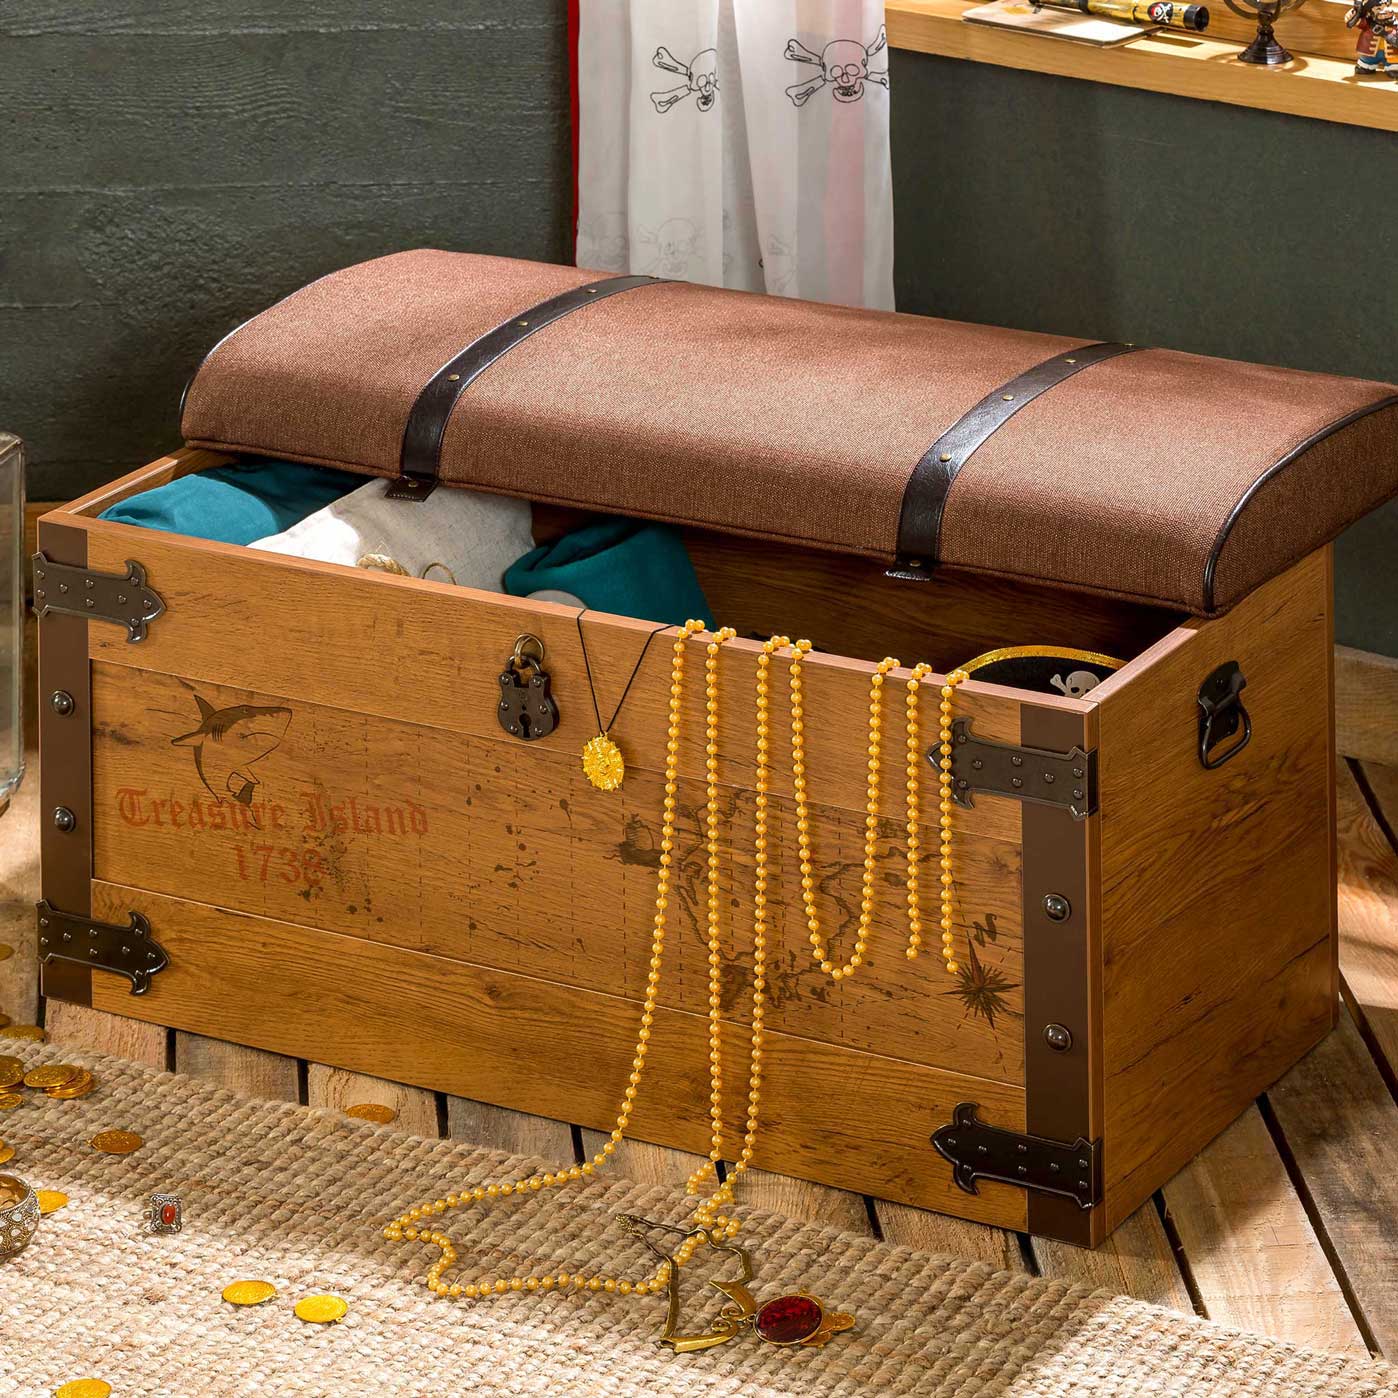 Pirate Toy Box Storage Bench with Cushion